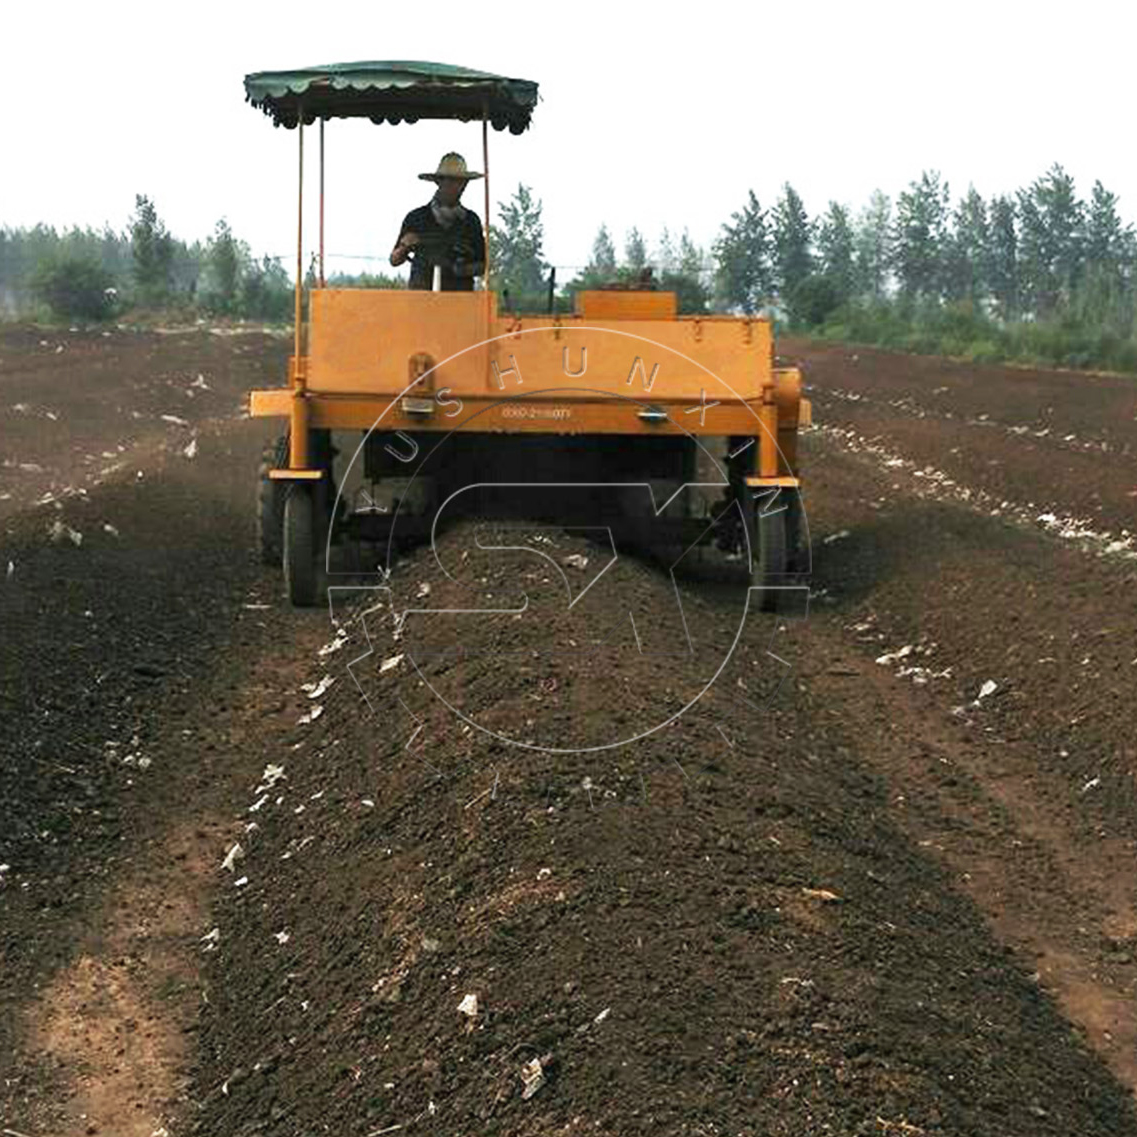 Moving Type Compost Turning Machine in Operation